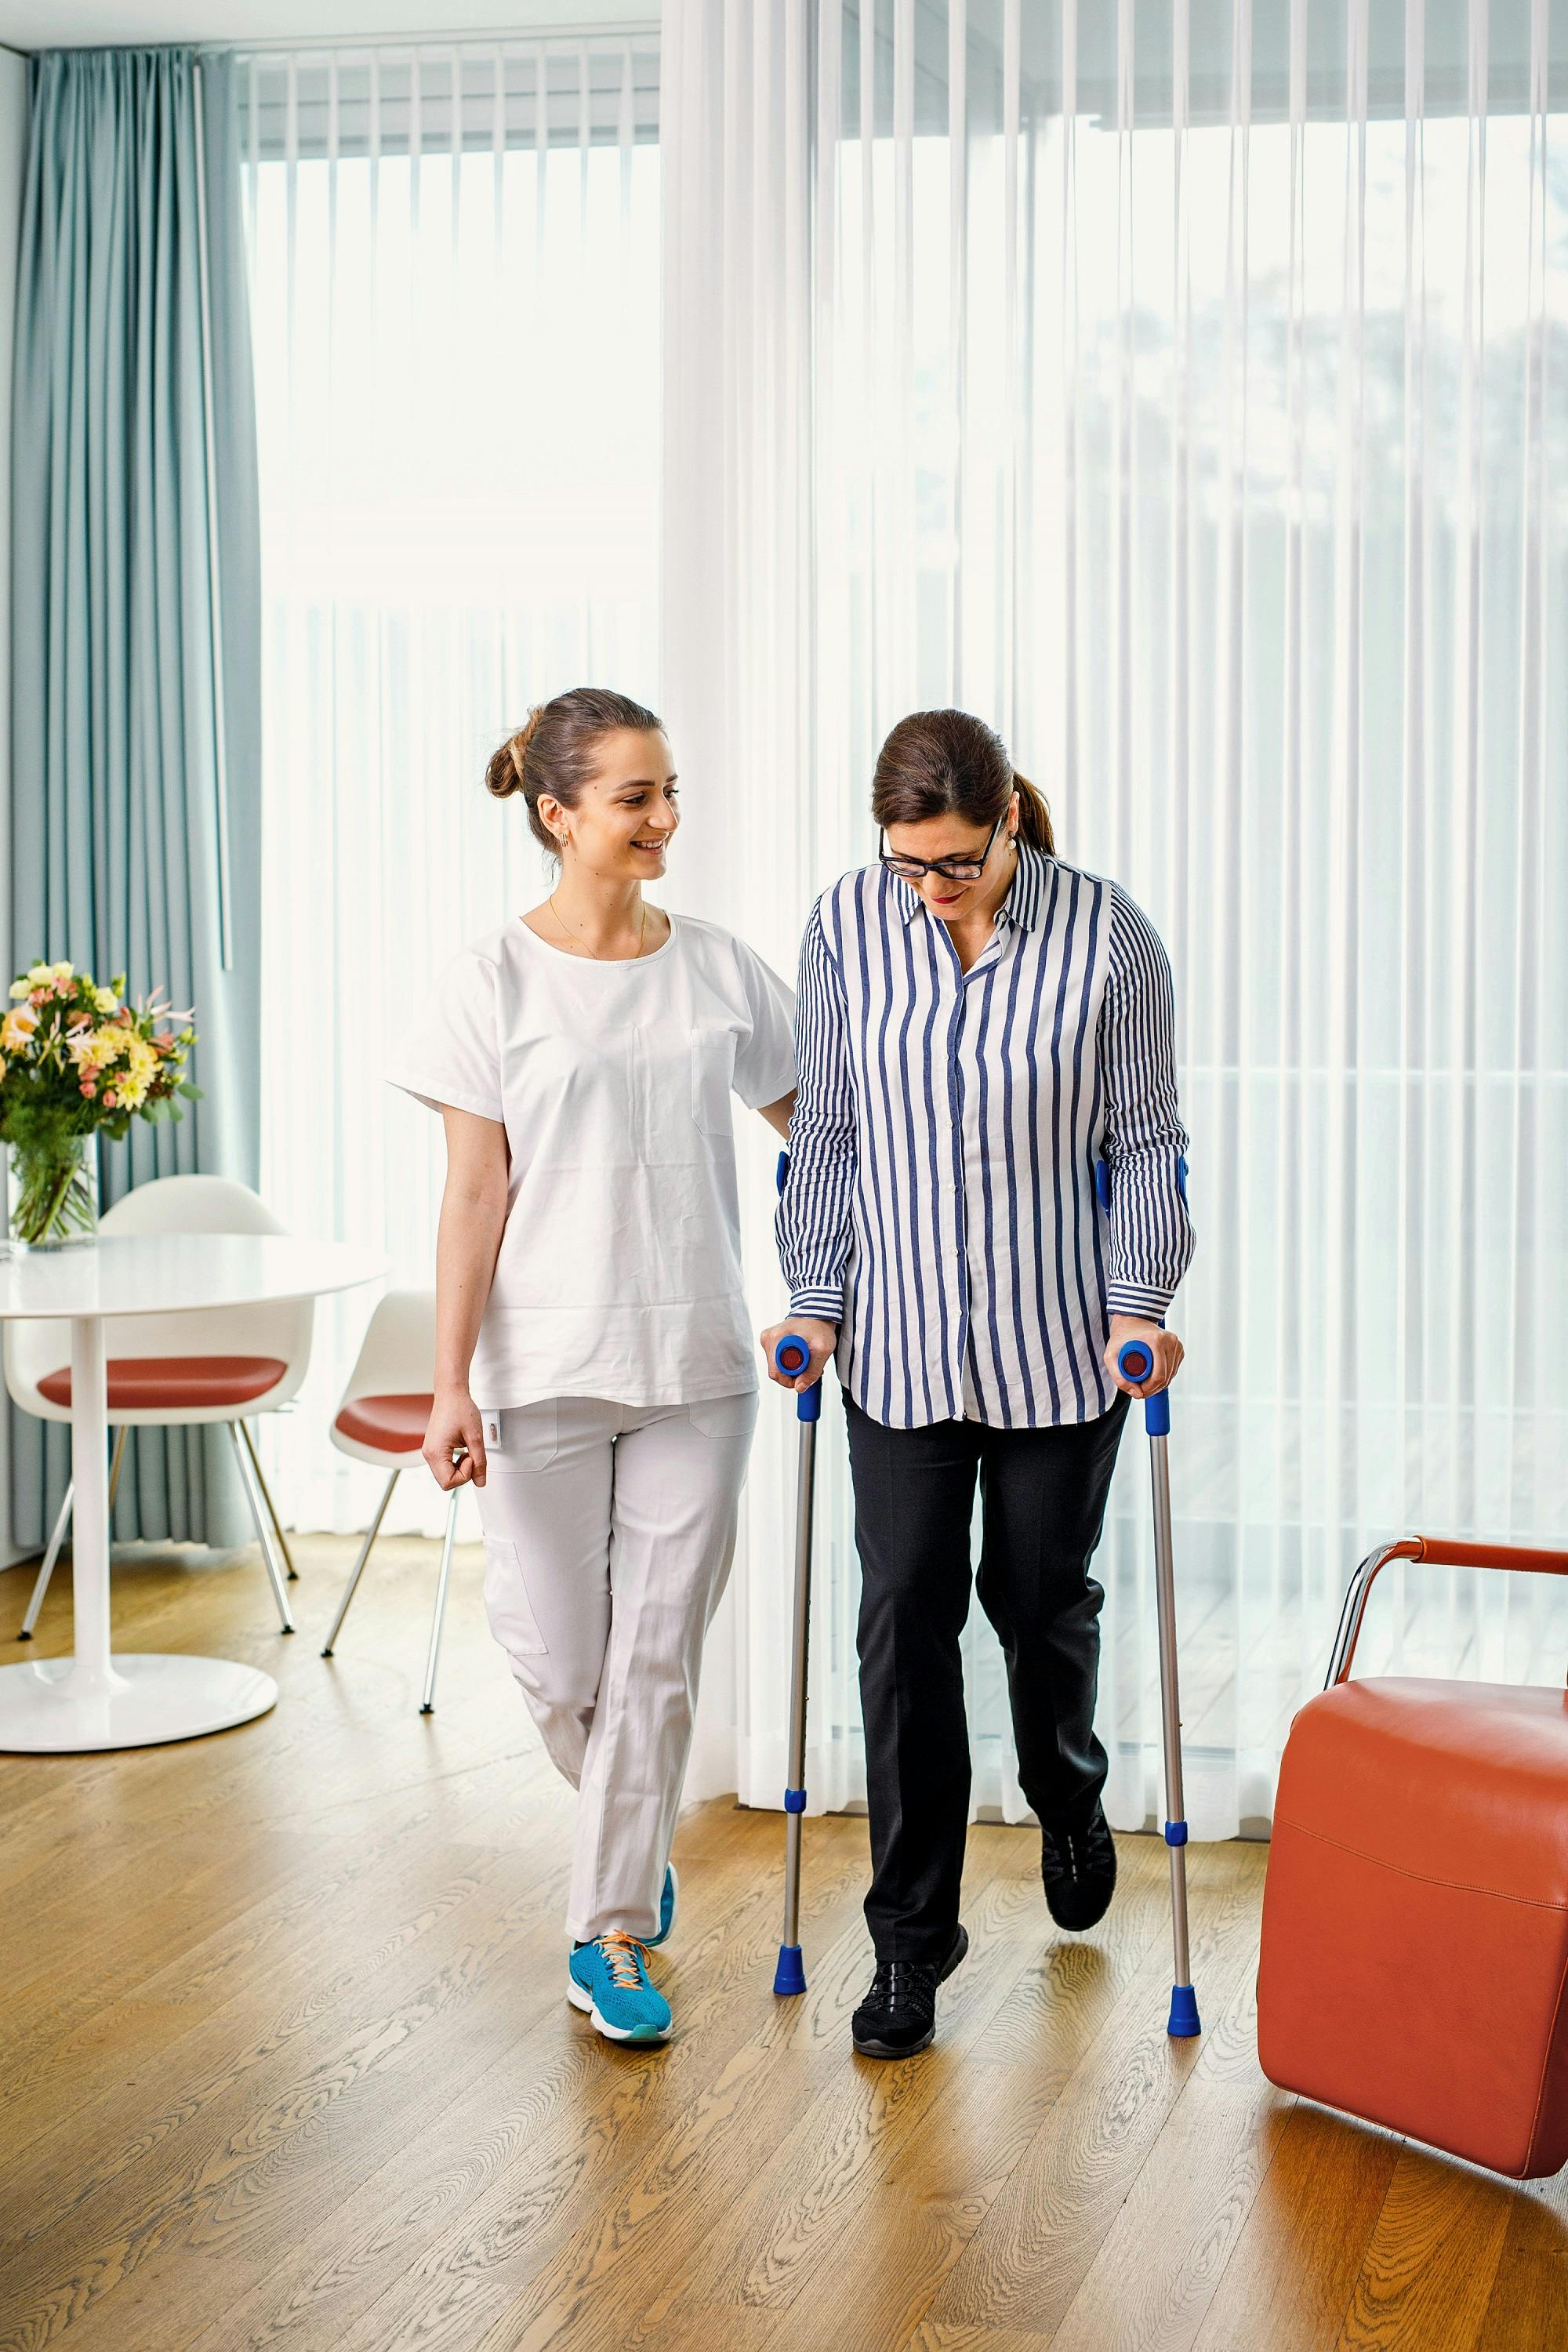 Physiotherapist supports a patient with walking aids during rehabilitation in a bright clinic.